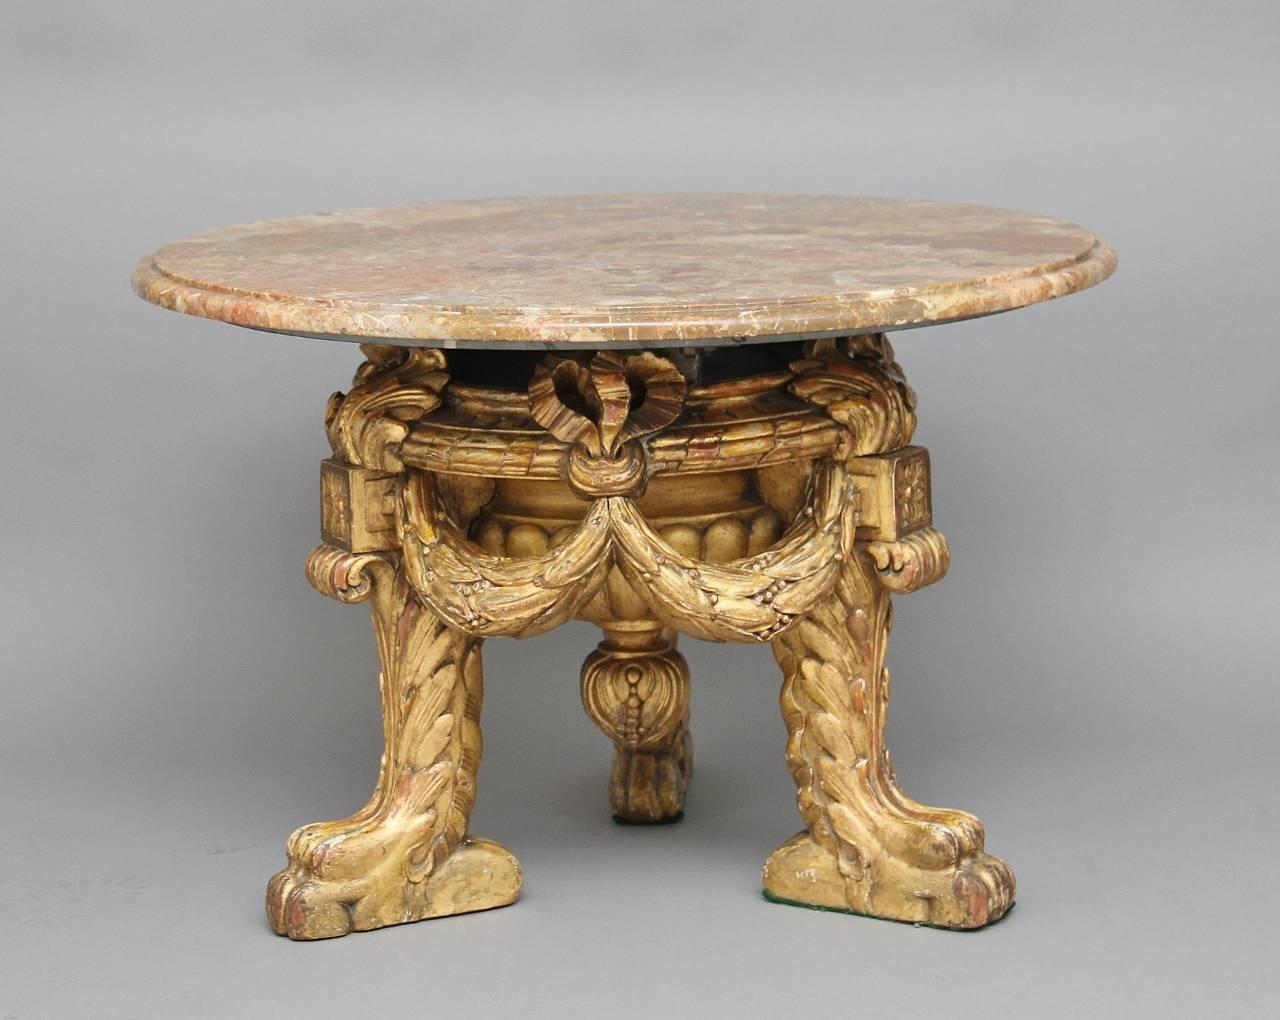 Mid-20th century Italian occasional or coffee table with a veined marble top with a moulded edge, the base made from giltwood which is heavily carved, decorated with swags which are united with the legs, standing on lion feet, circa